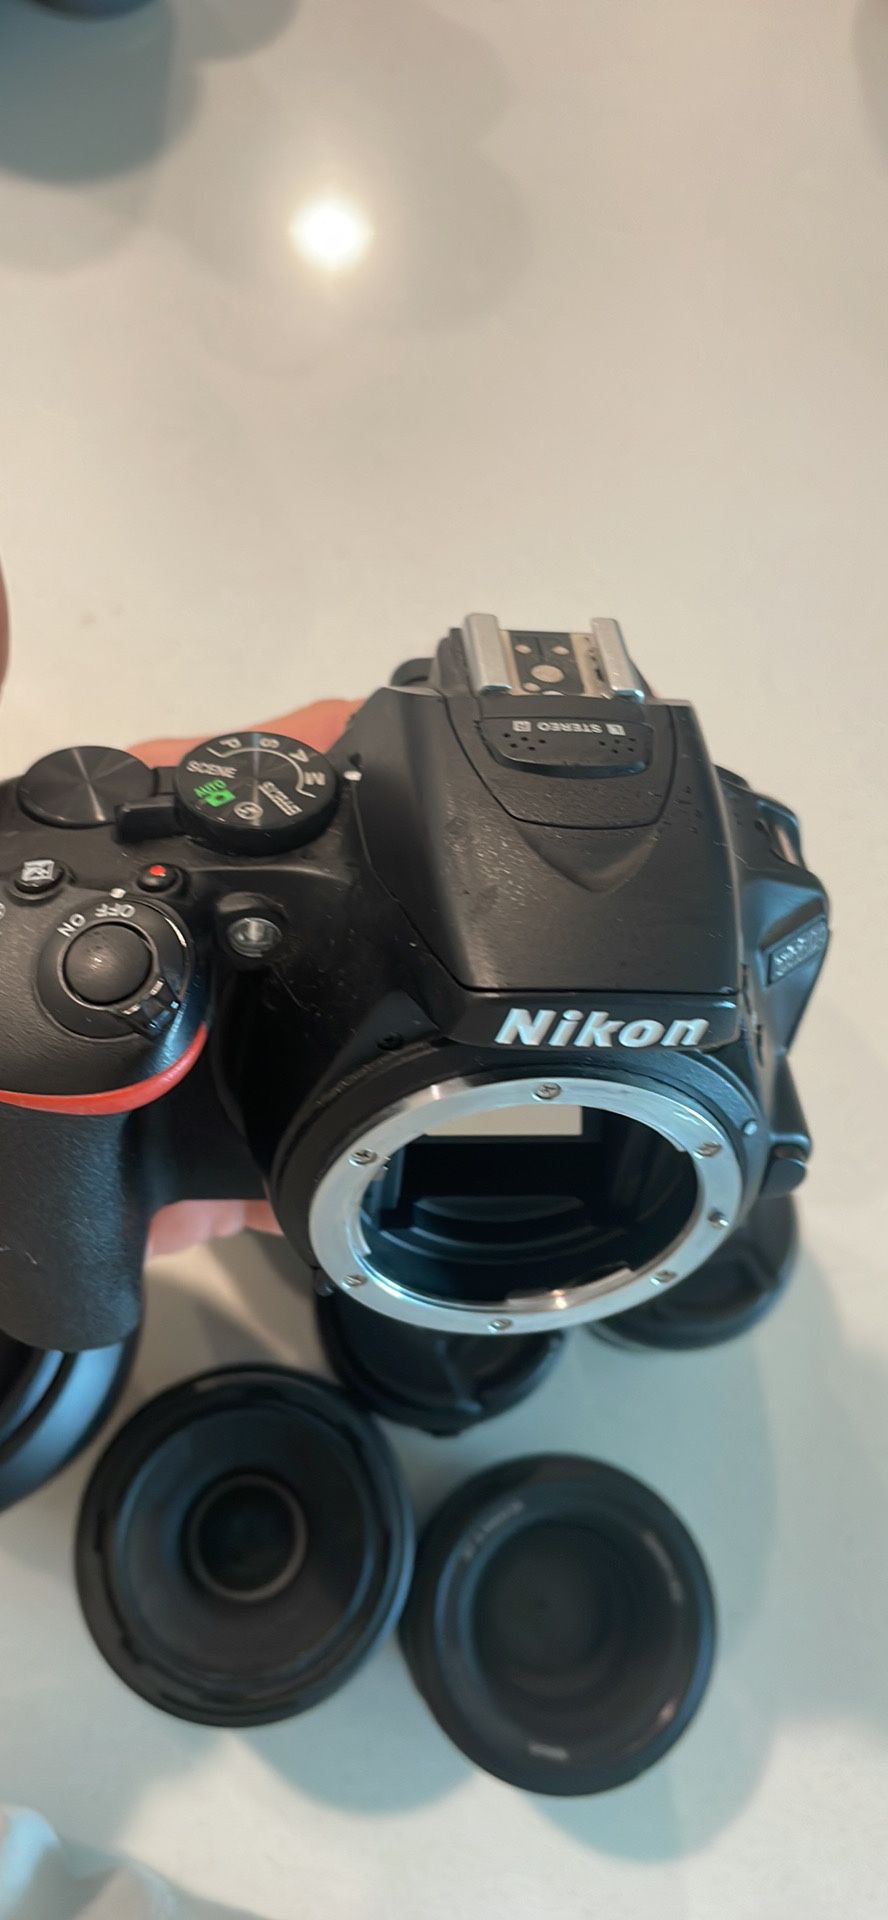 Nikon D5600 Body/lenses *Multiple Items Prices Listed Below*